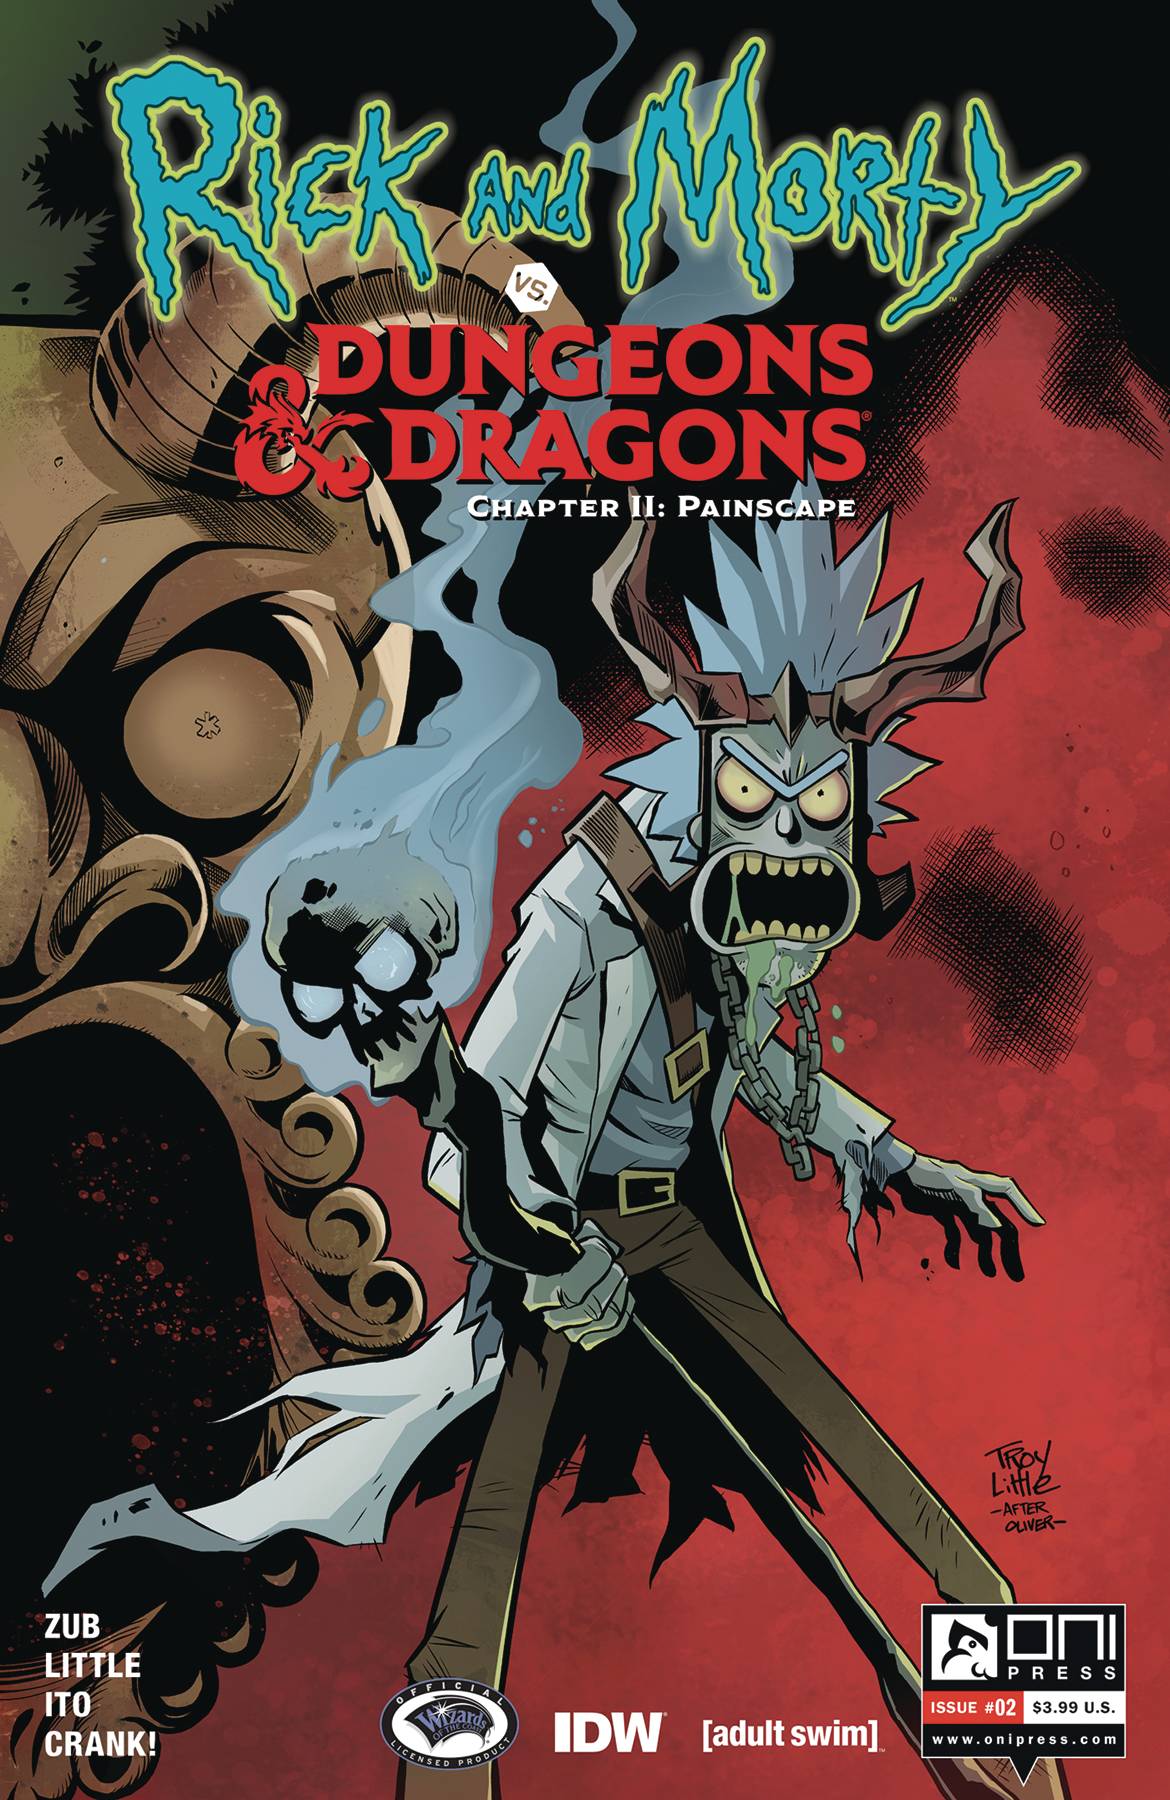 Rick and Morty Vs Dungeons & Dragons II Painscape #2 Cover A Little (Mature)